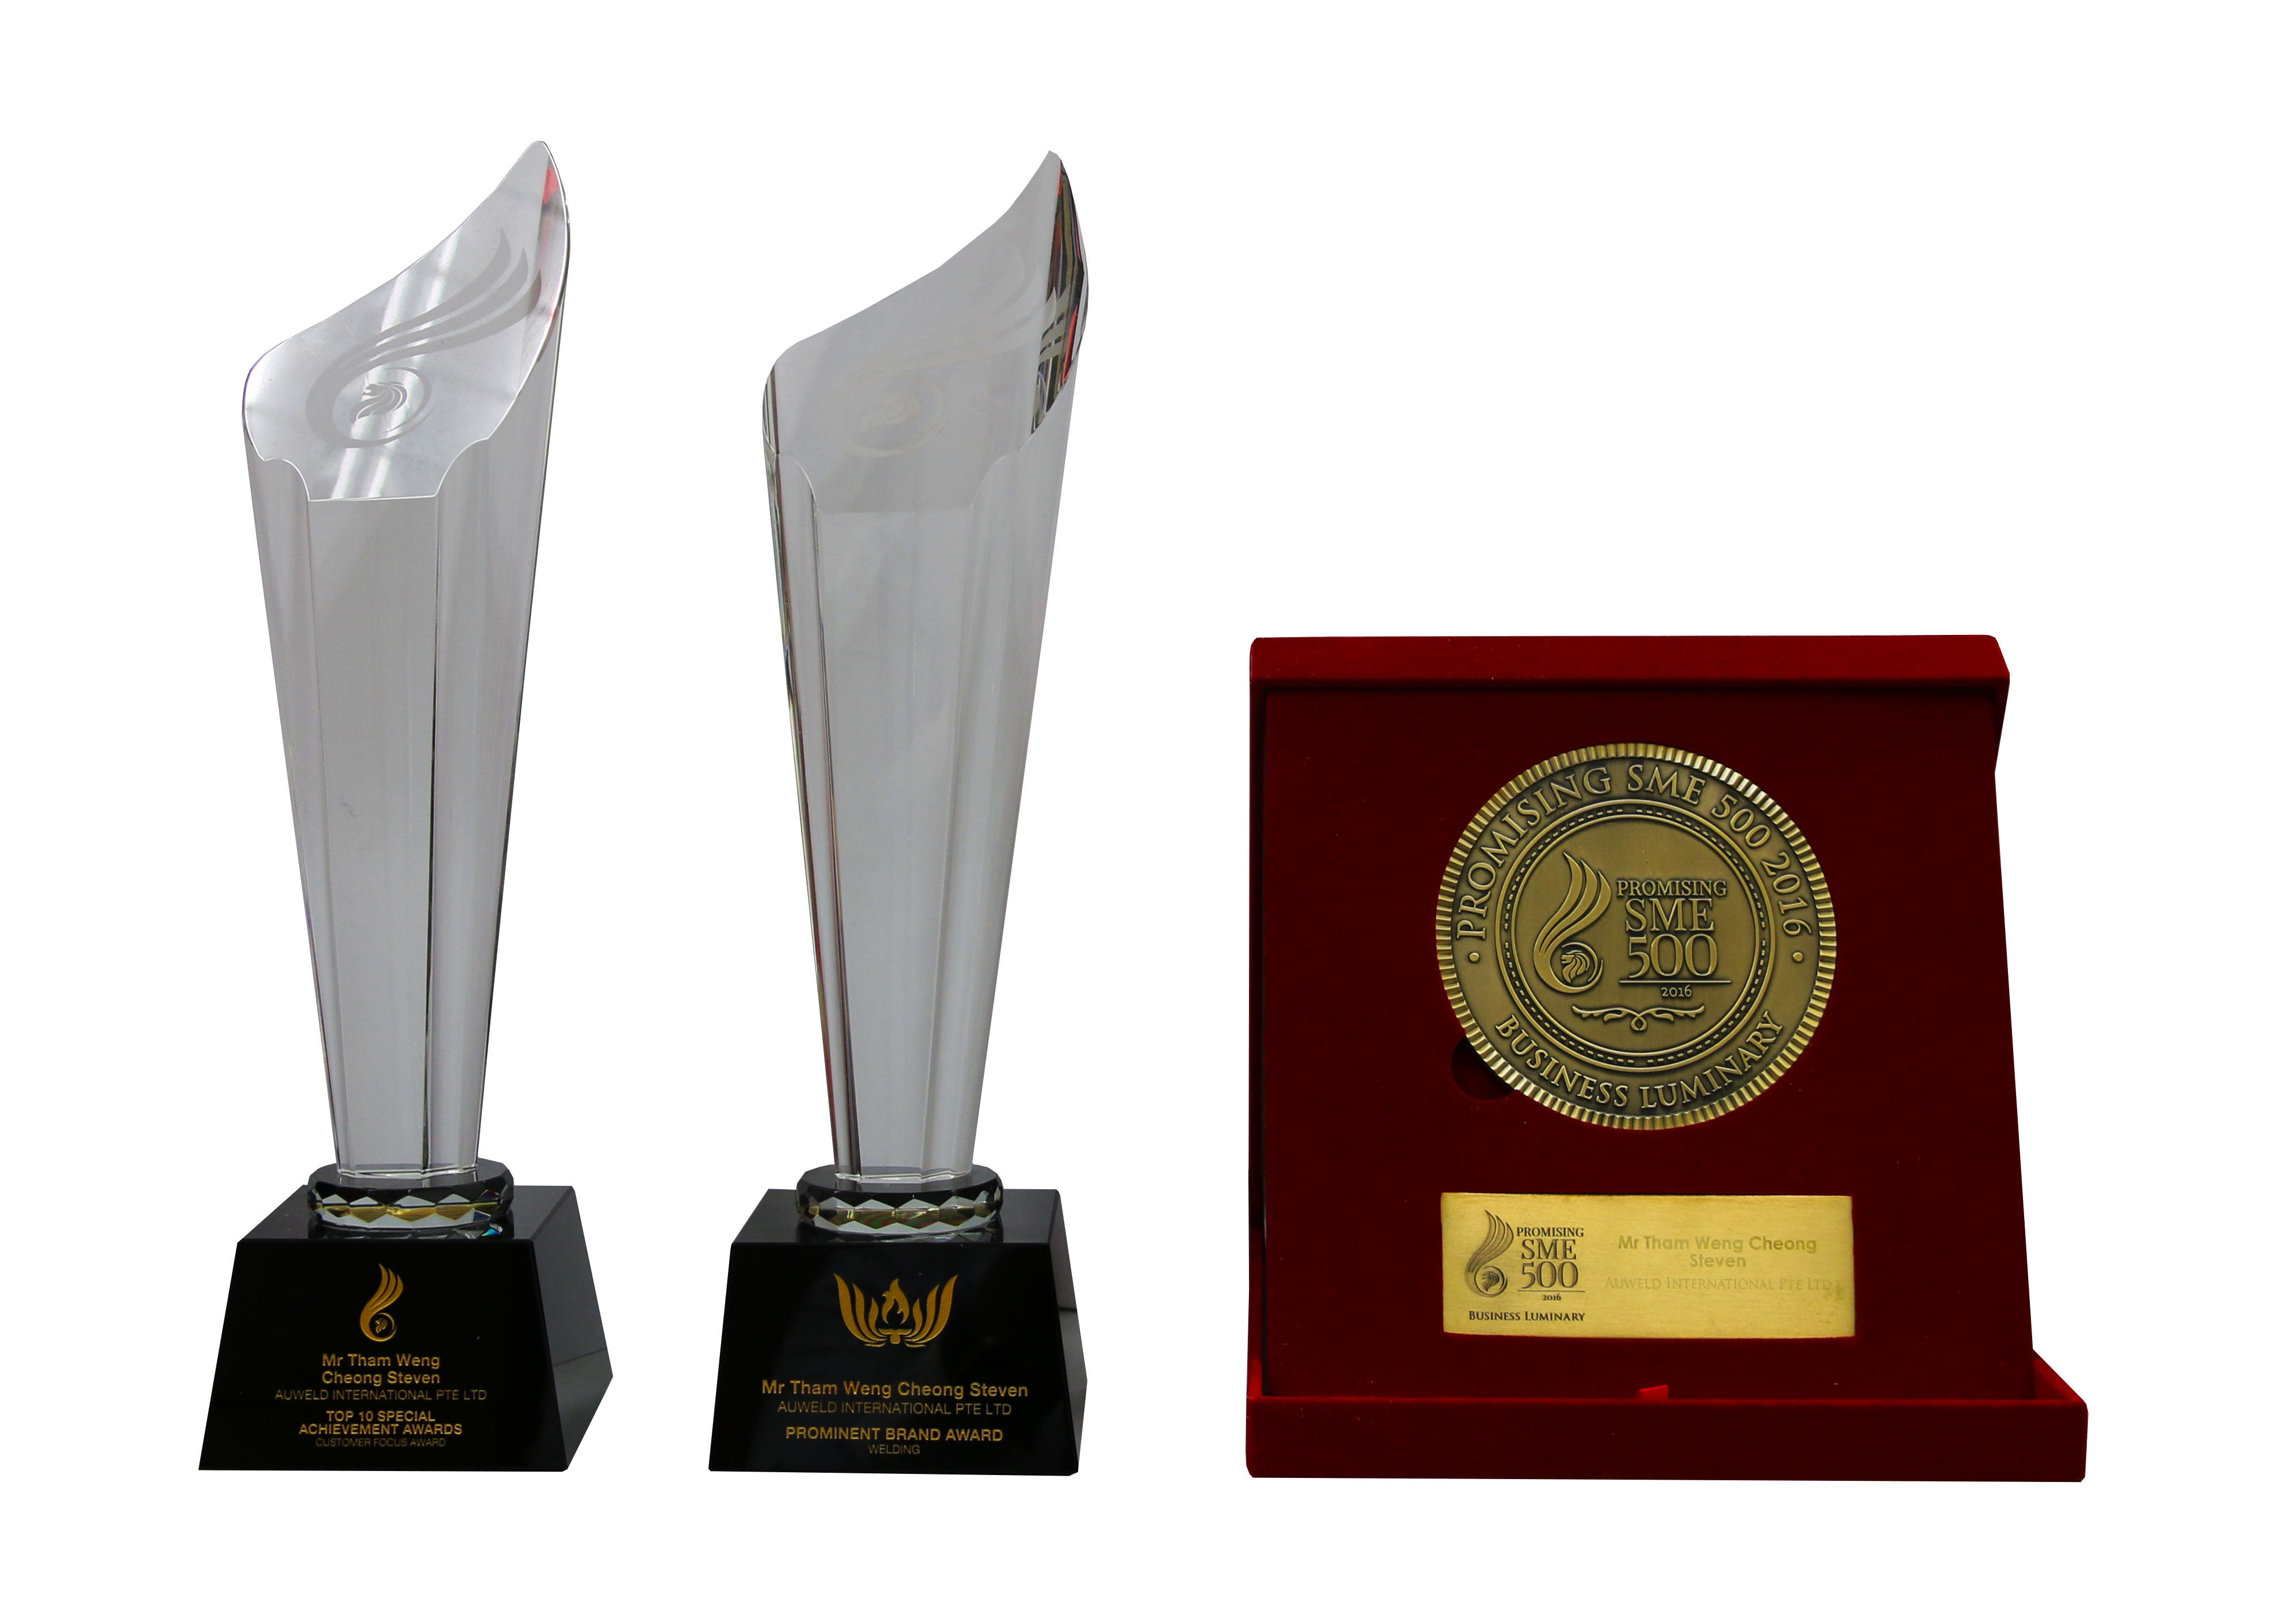 Awards received in 2016